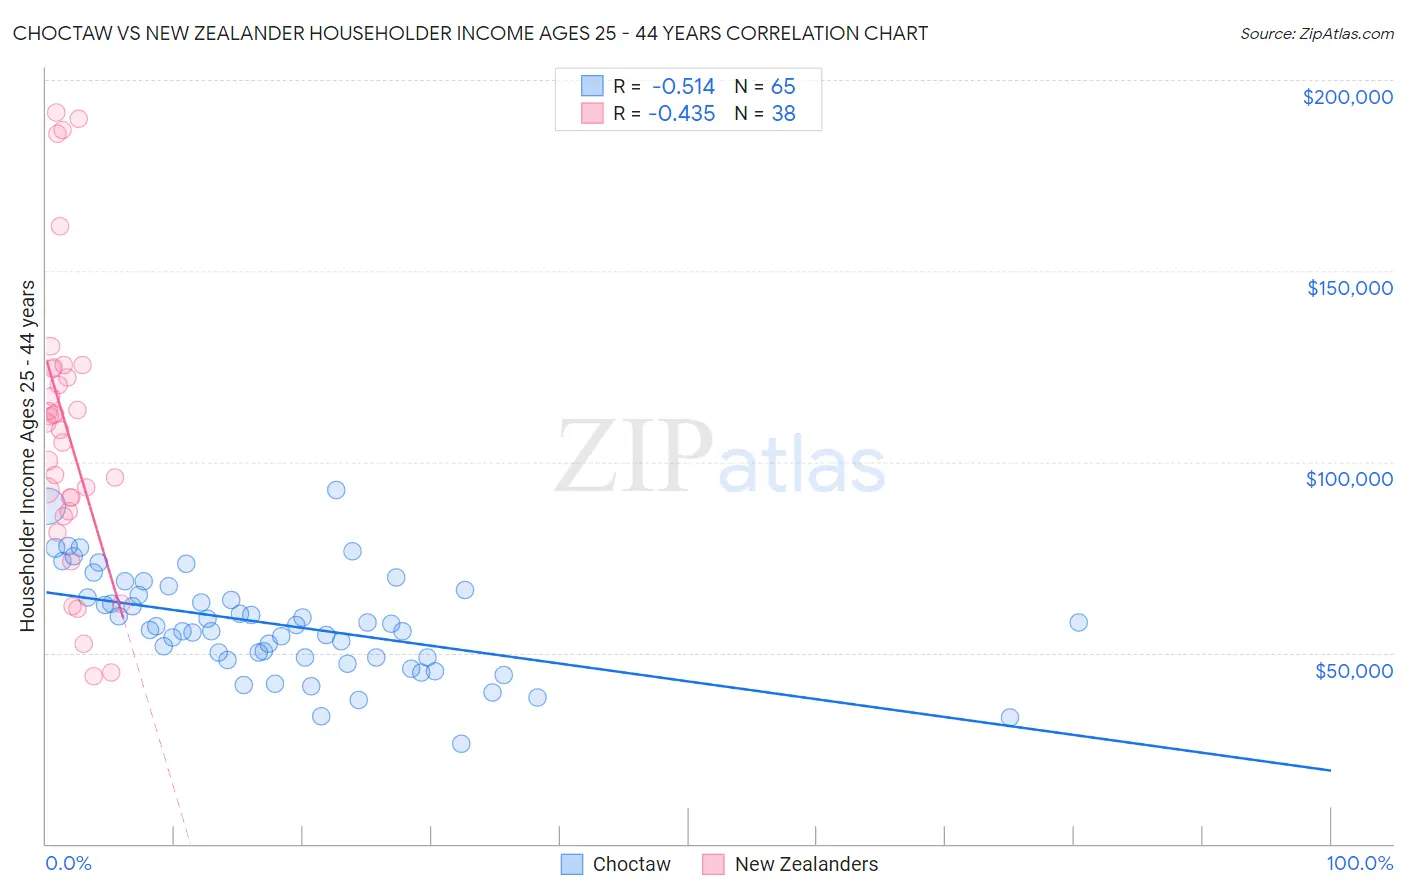 Choctaw vs New Zealander Householder Income Ages 25 - 44 years